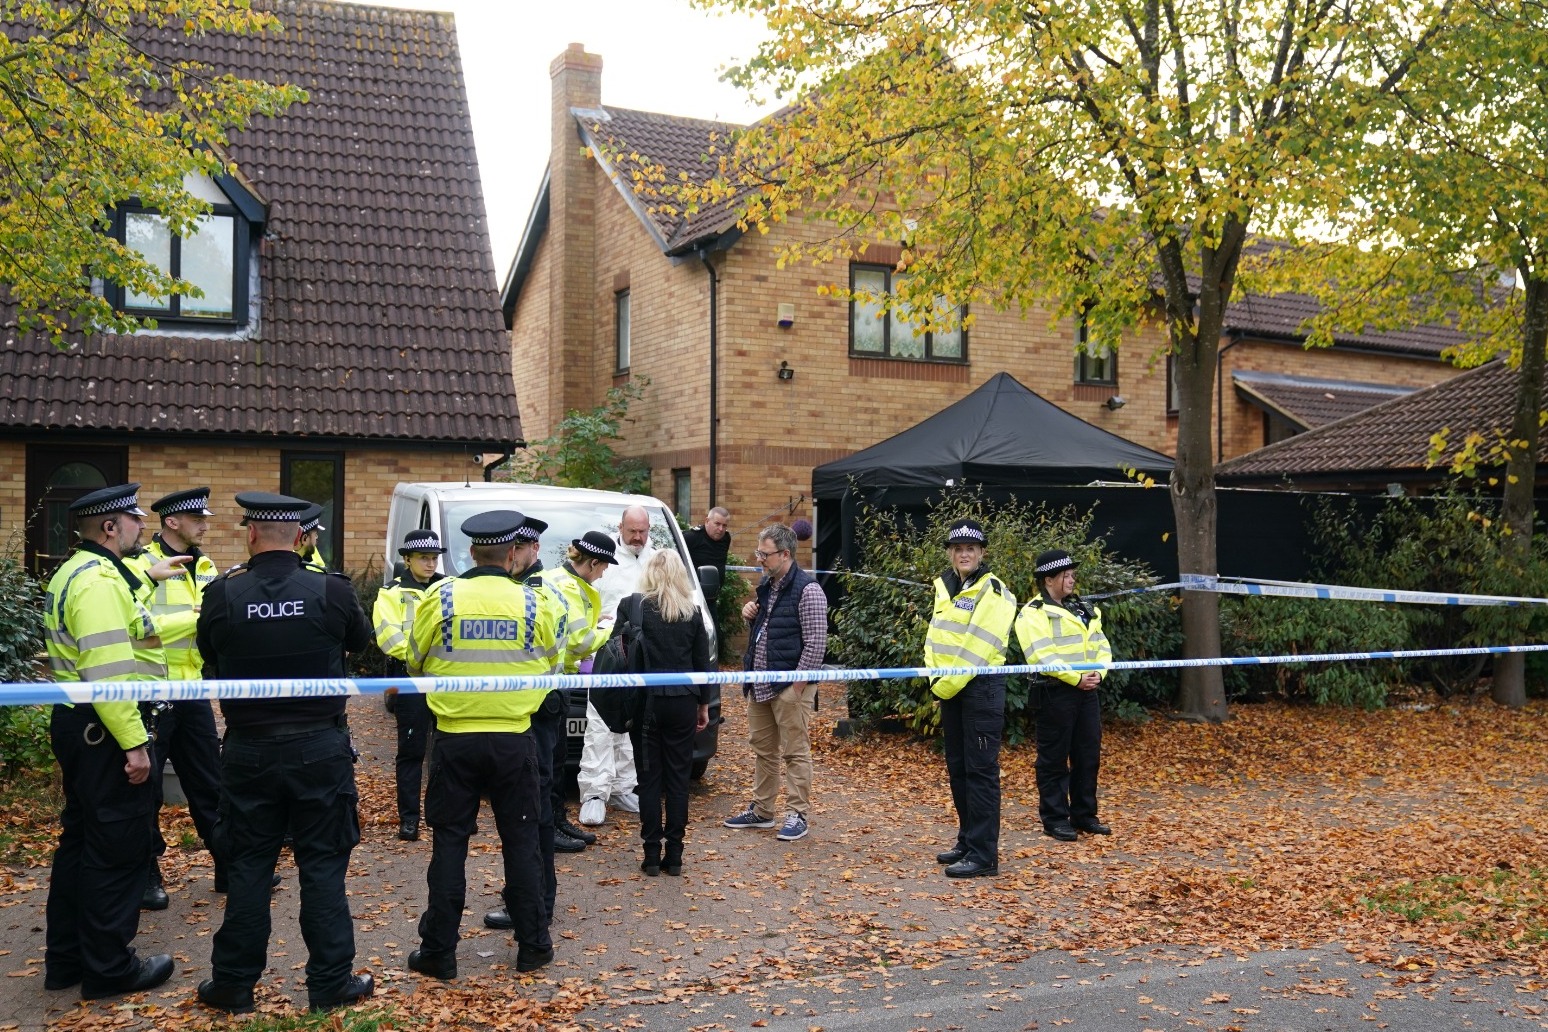 Forensics experts scouring house where human remains were found 